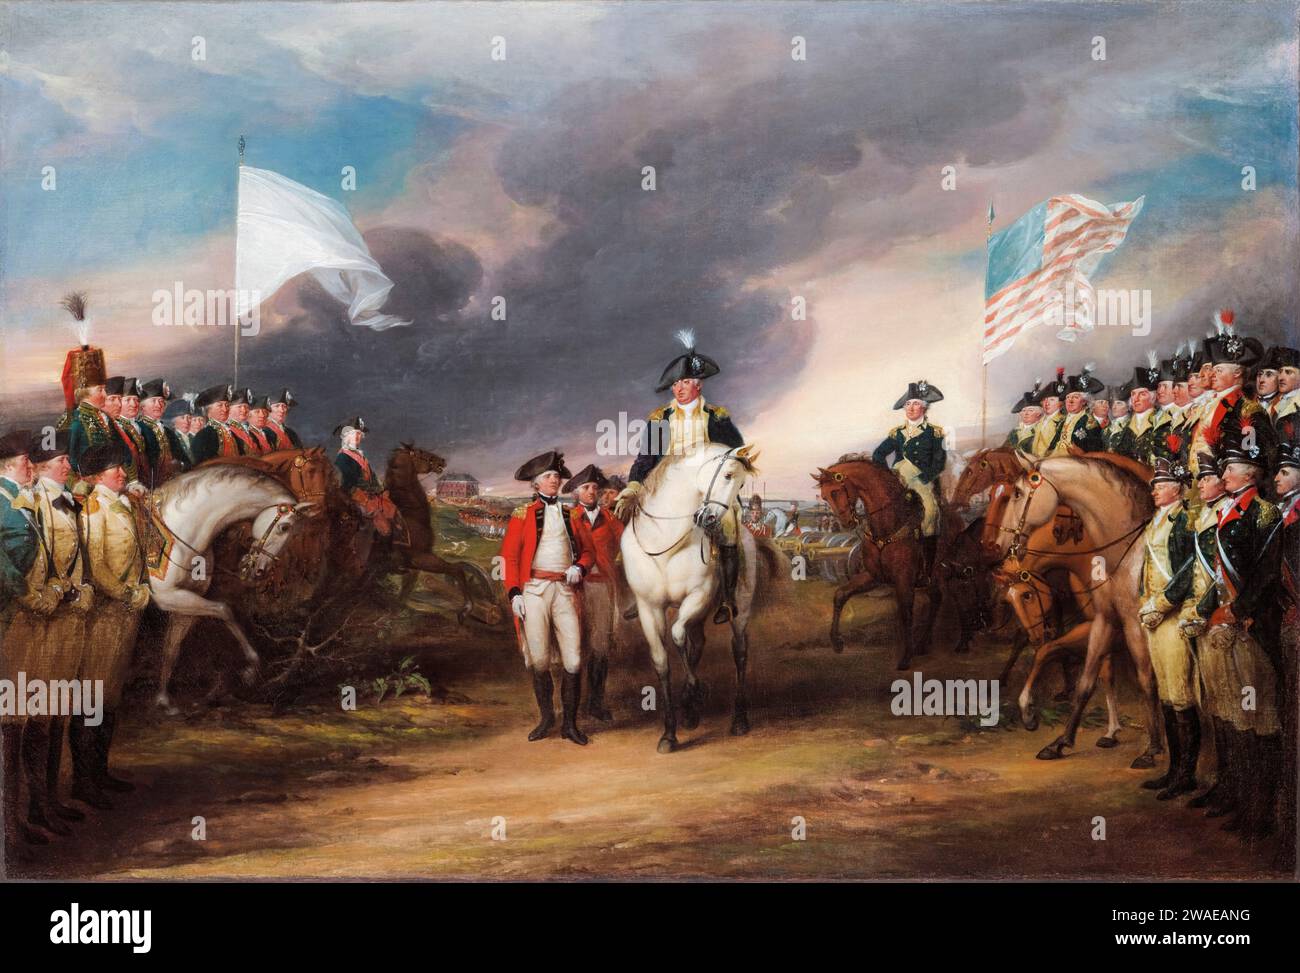 The Surrender of Lord Cornwallis at Yorktown, October 19th 1781, (The Yorktown Surrender), painting in oil on canvas by John Trumbull, 1787-1828 Stock Photo